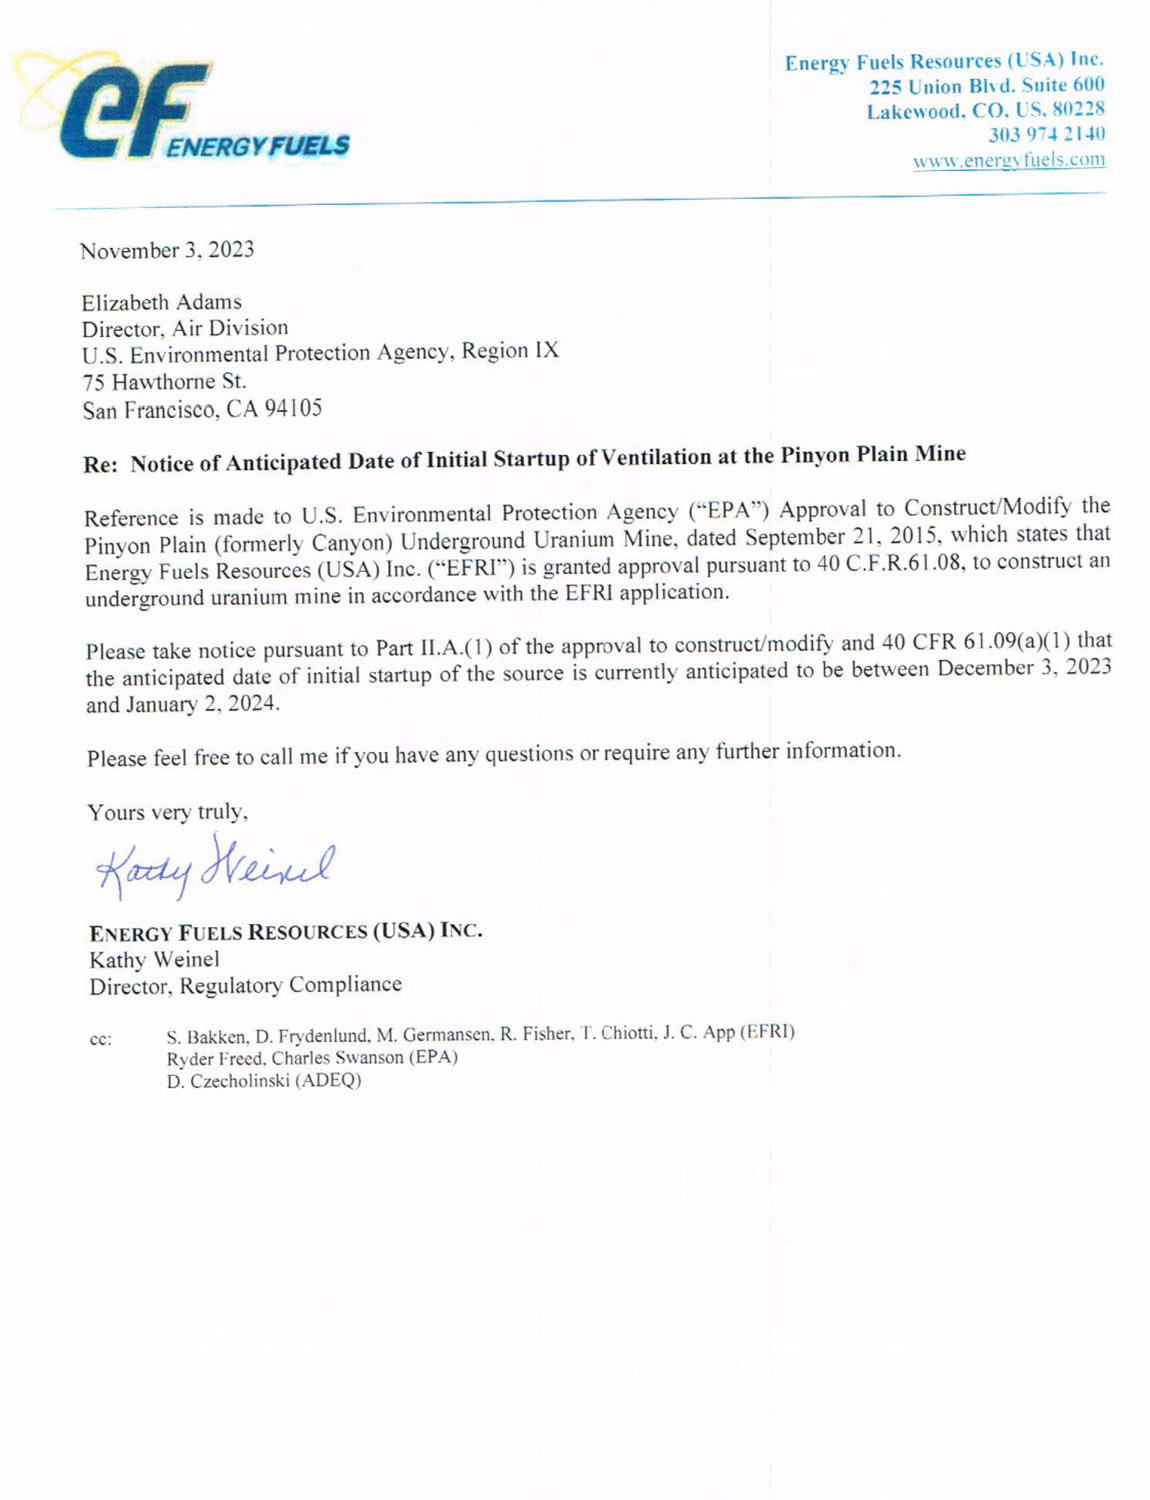 Read the letter from Energy Fuels